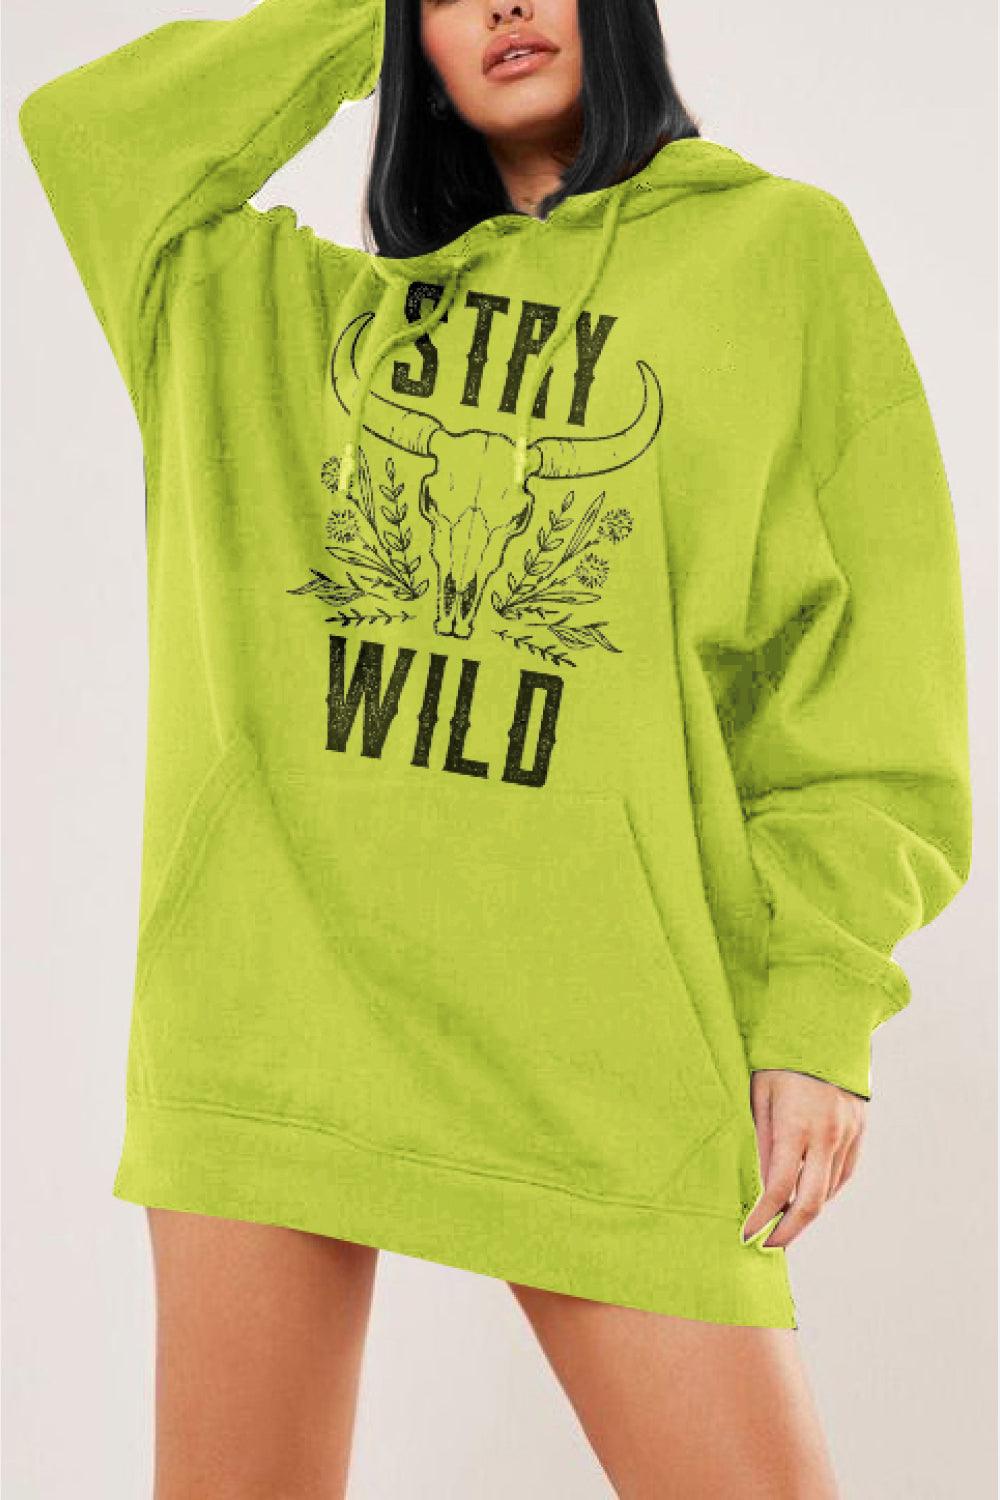 Simply Love Simply Love Full Size STAY WILD Graphic Hoodie - Lucianne Boutique